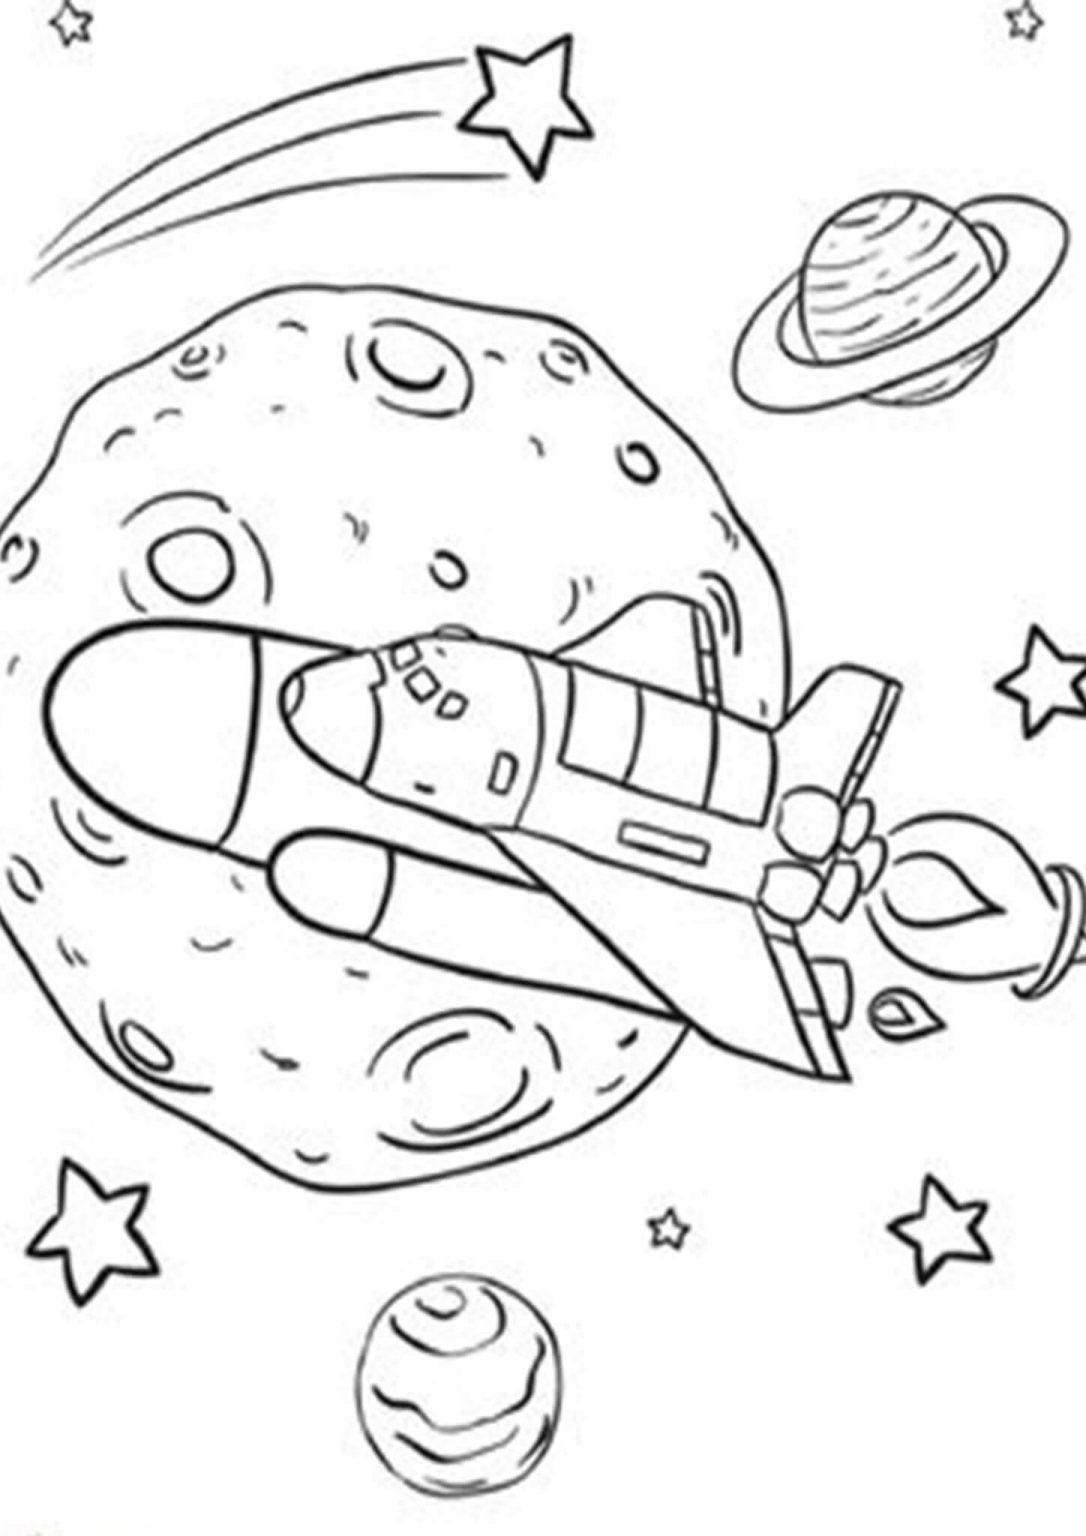 free-easy-to-print-space-coloring-pages-tulamama-free-easy-to-print